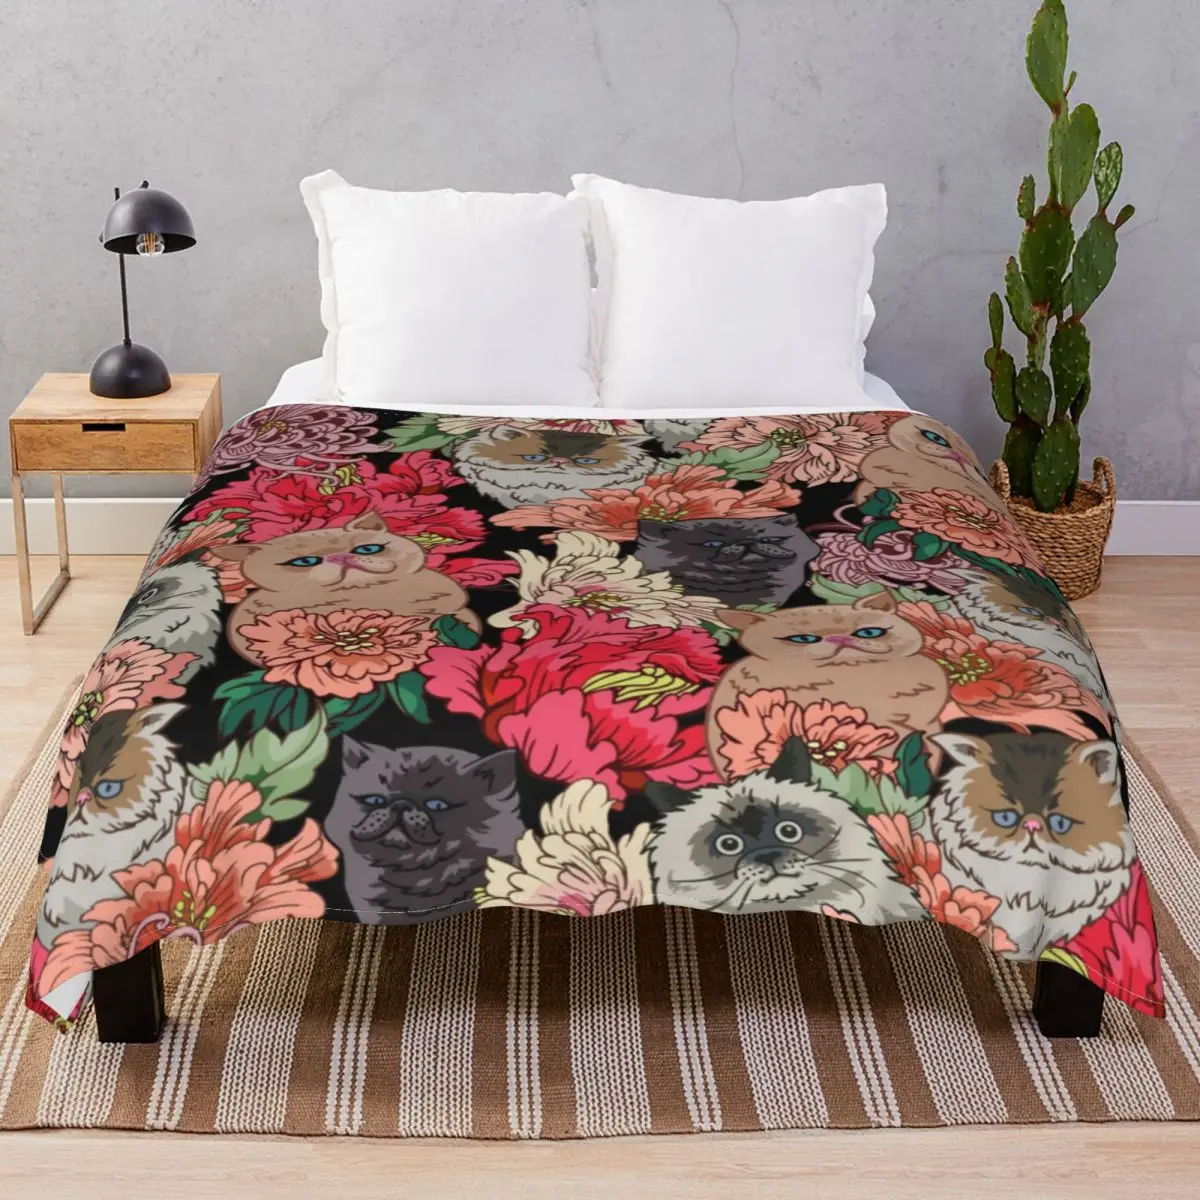 Because Cats Blanket Velvet Print Multifunction Throw Blankets for Bedding Home Couch Camp Office